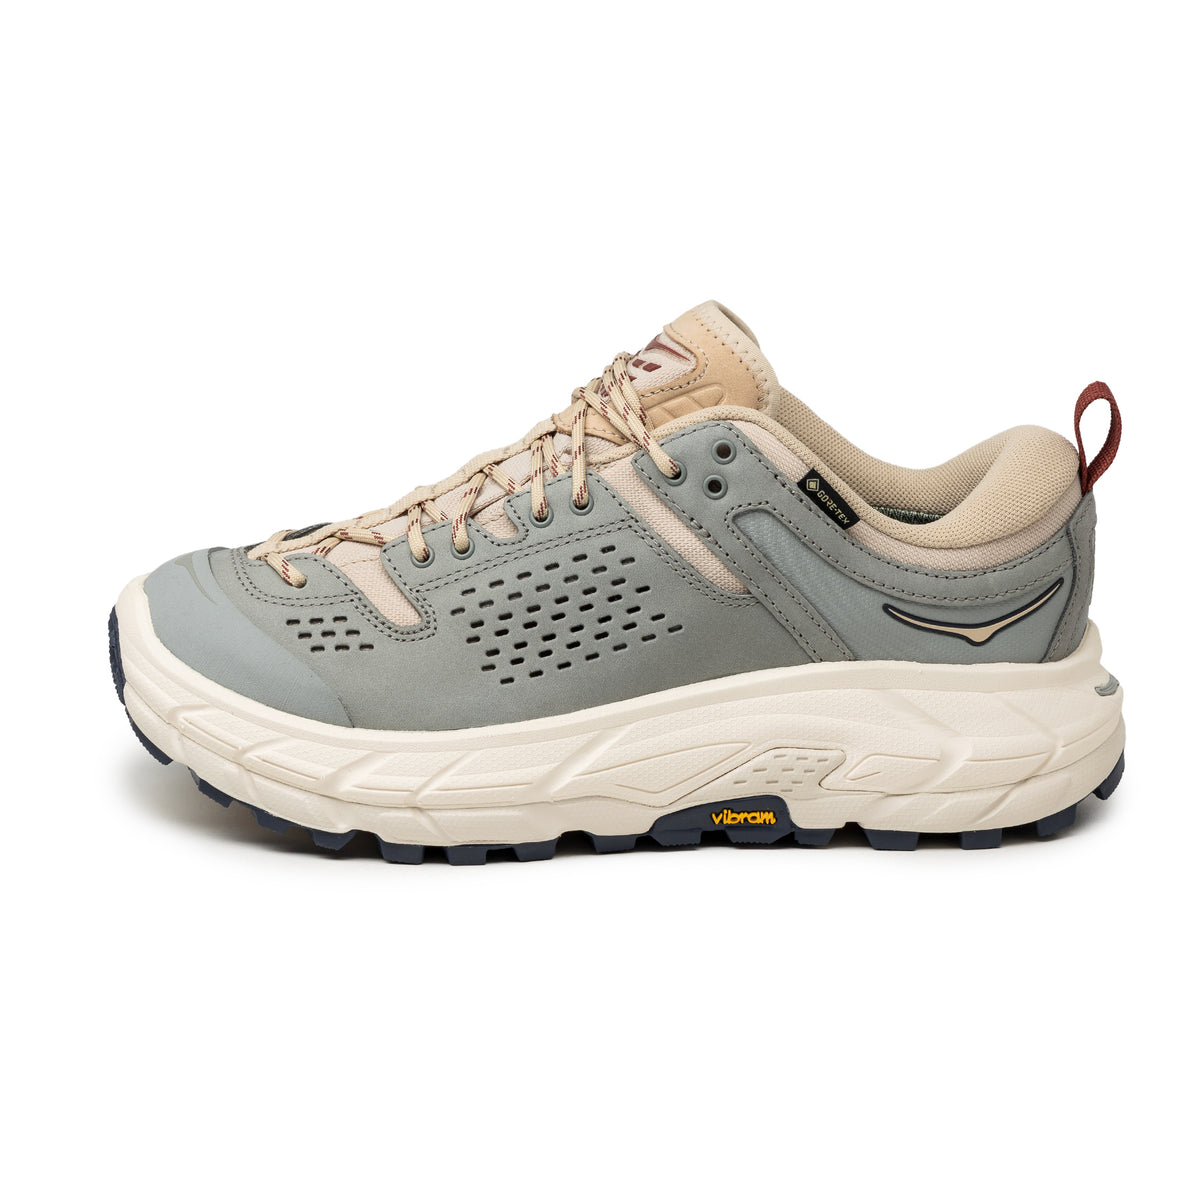 Hoka One One Tor Ultra Low *GORE Tex* » Buy online now!